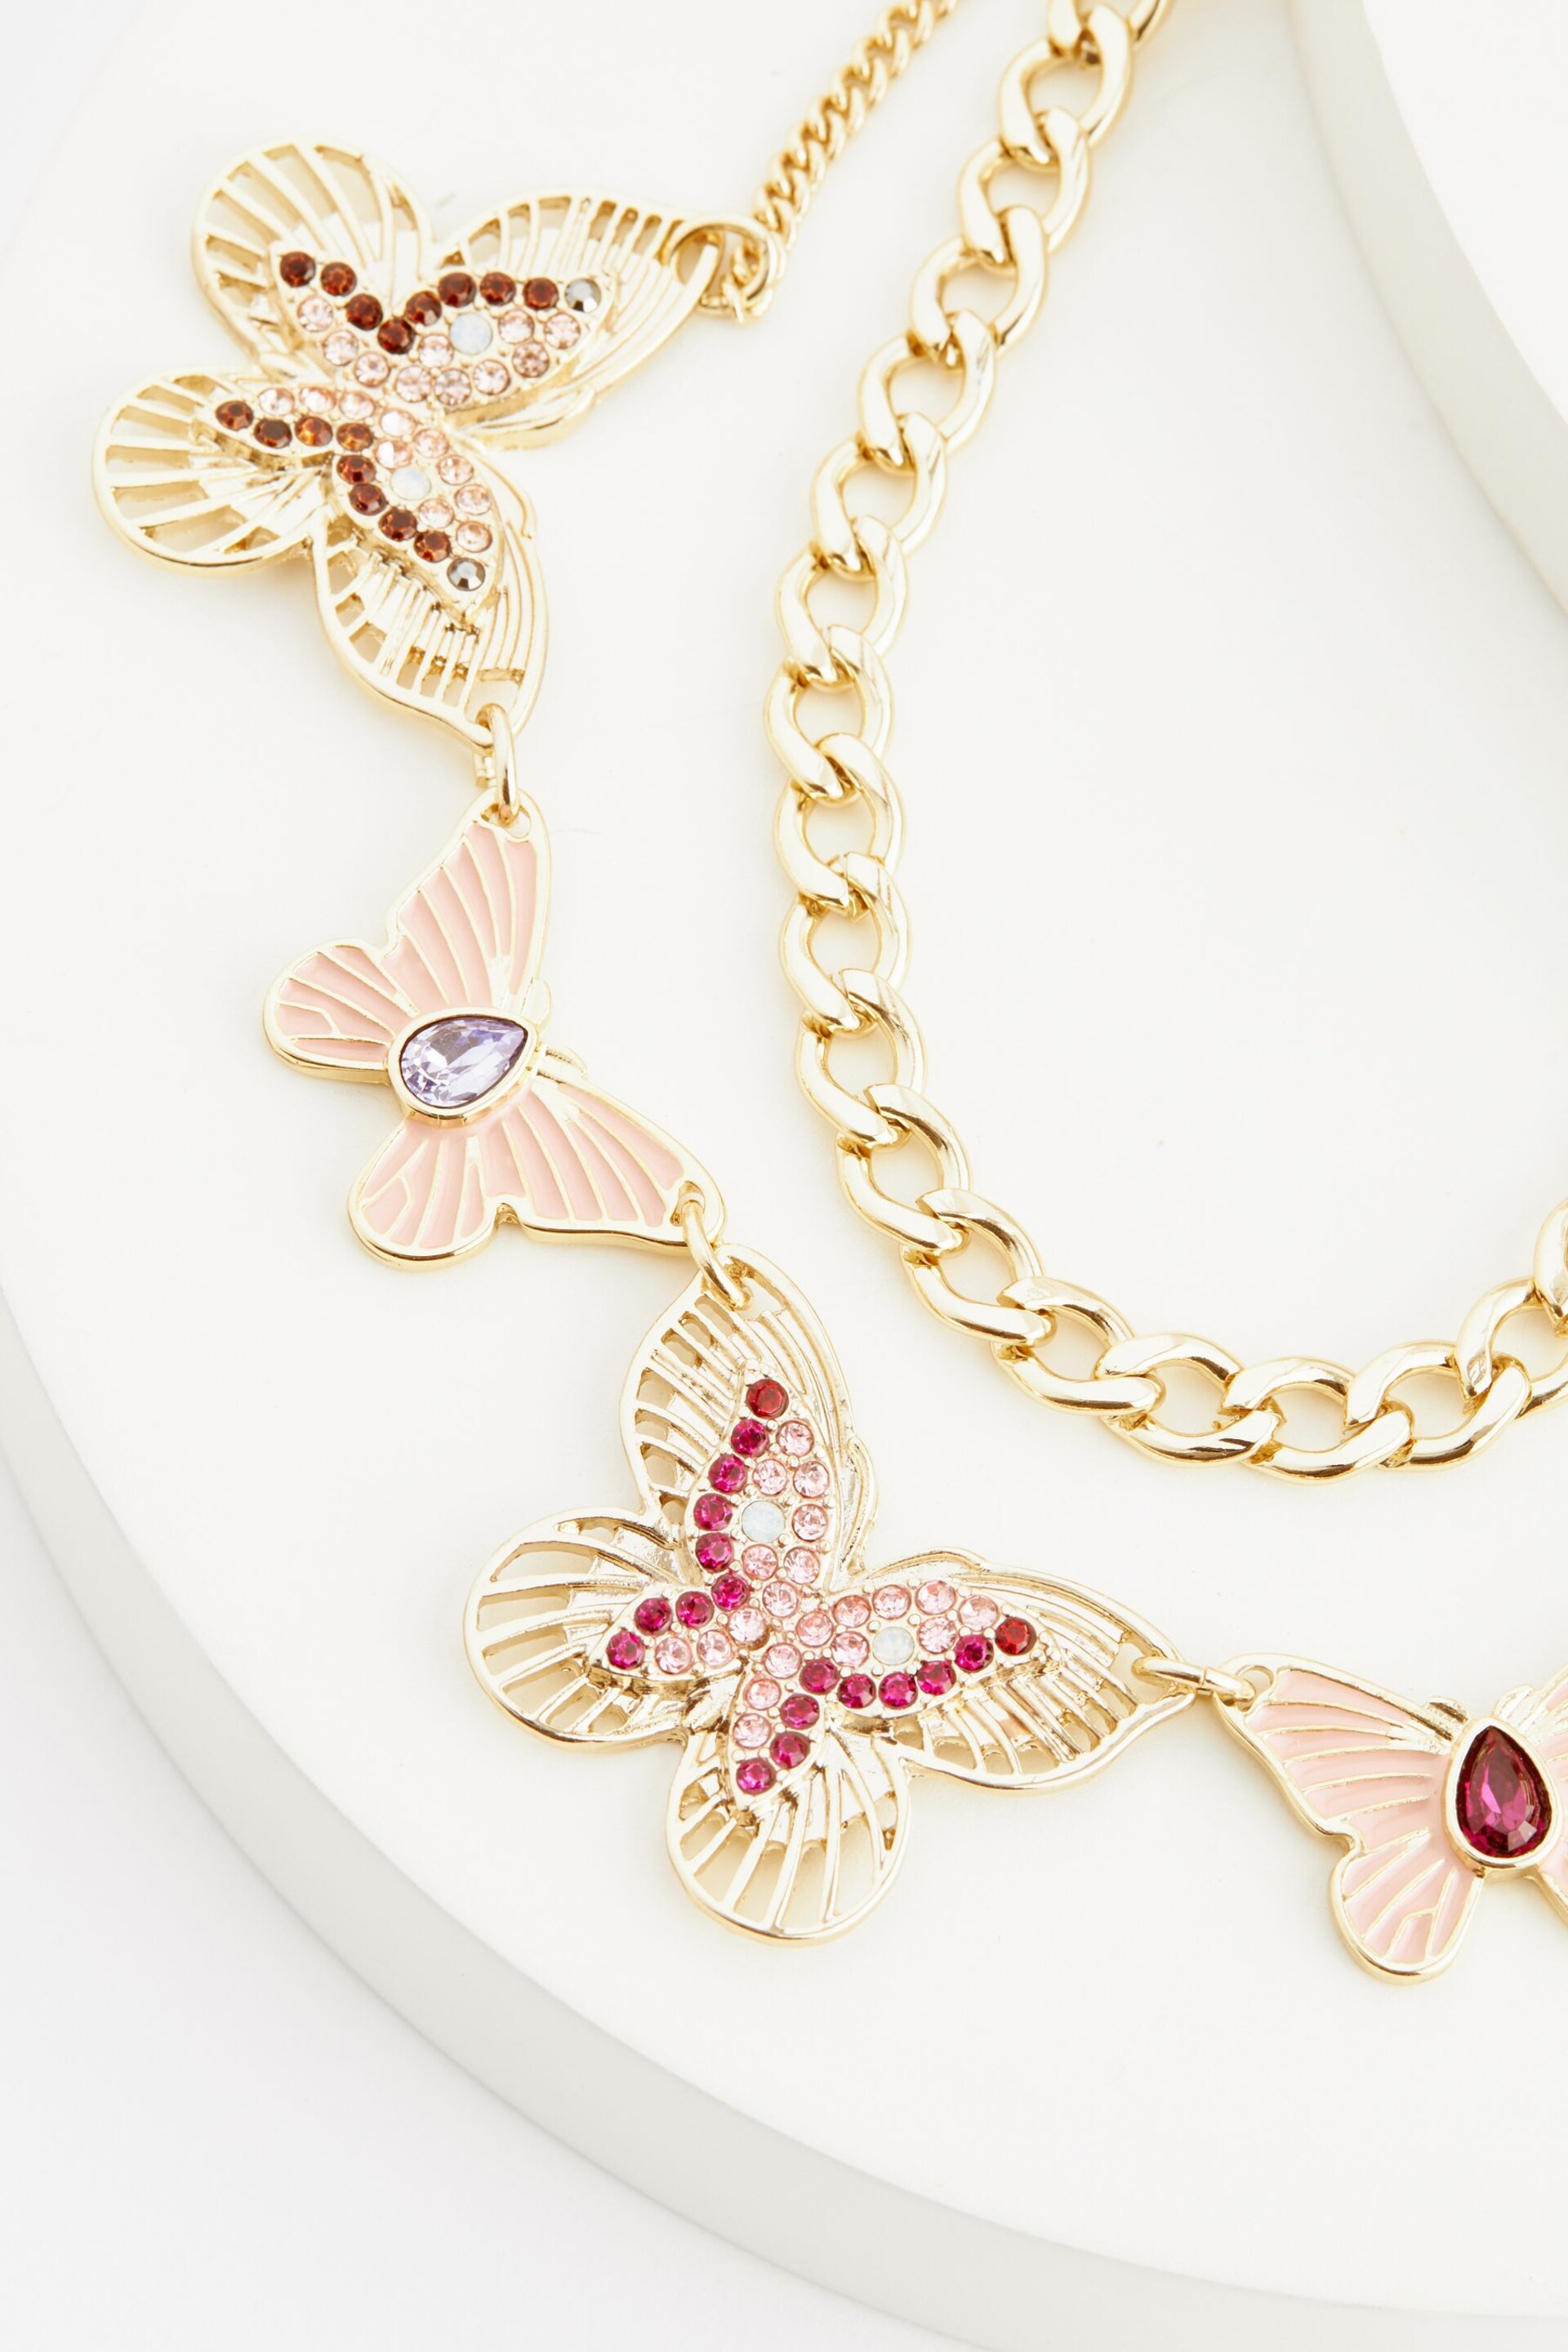 Gold Tone Butterfly Statement Necklace - Image 5 of 5